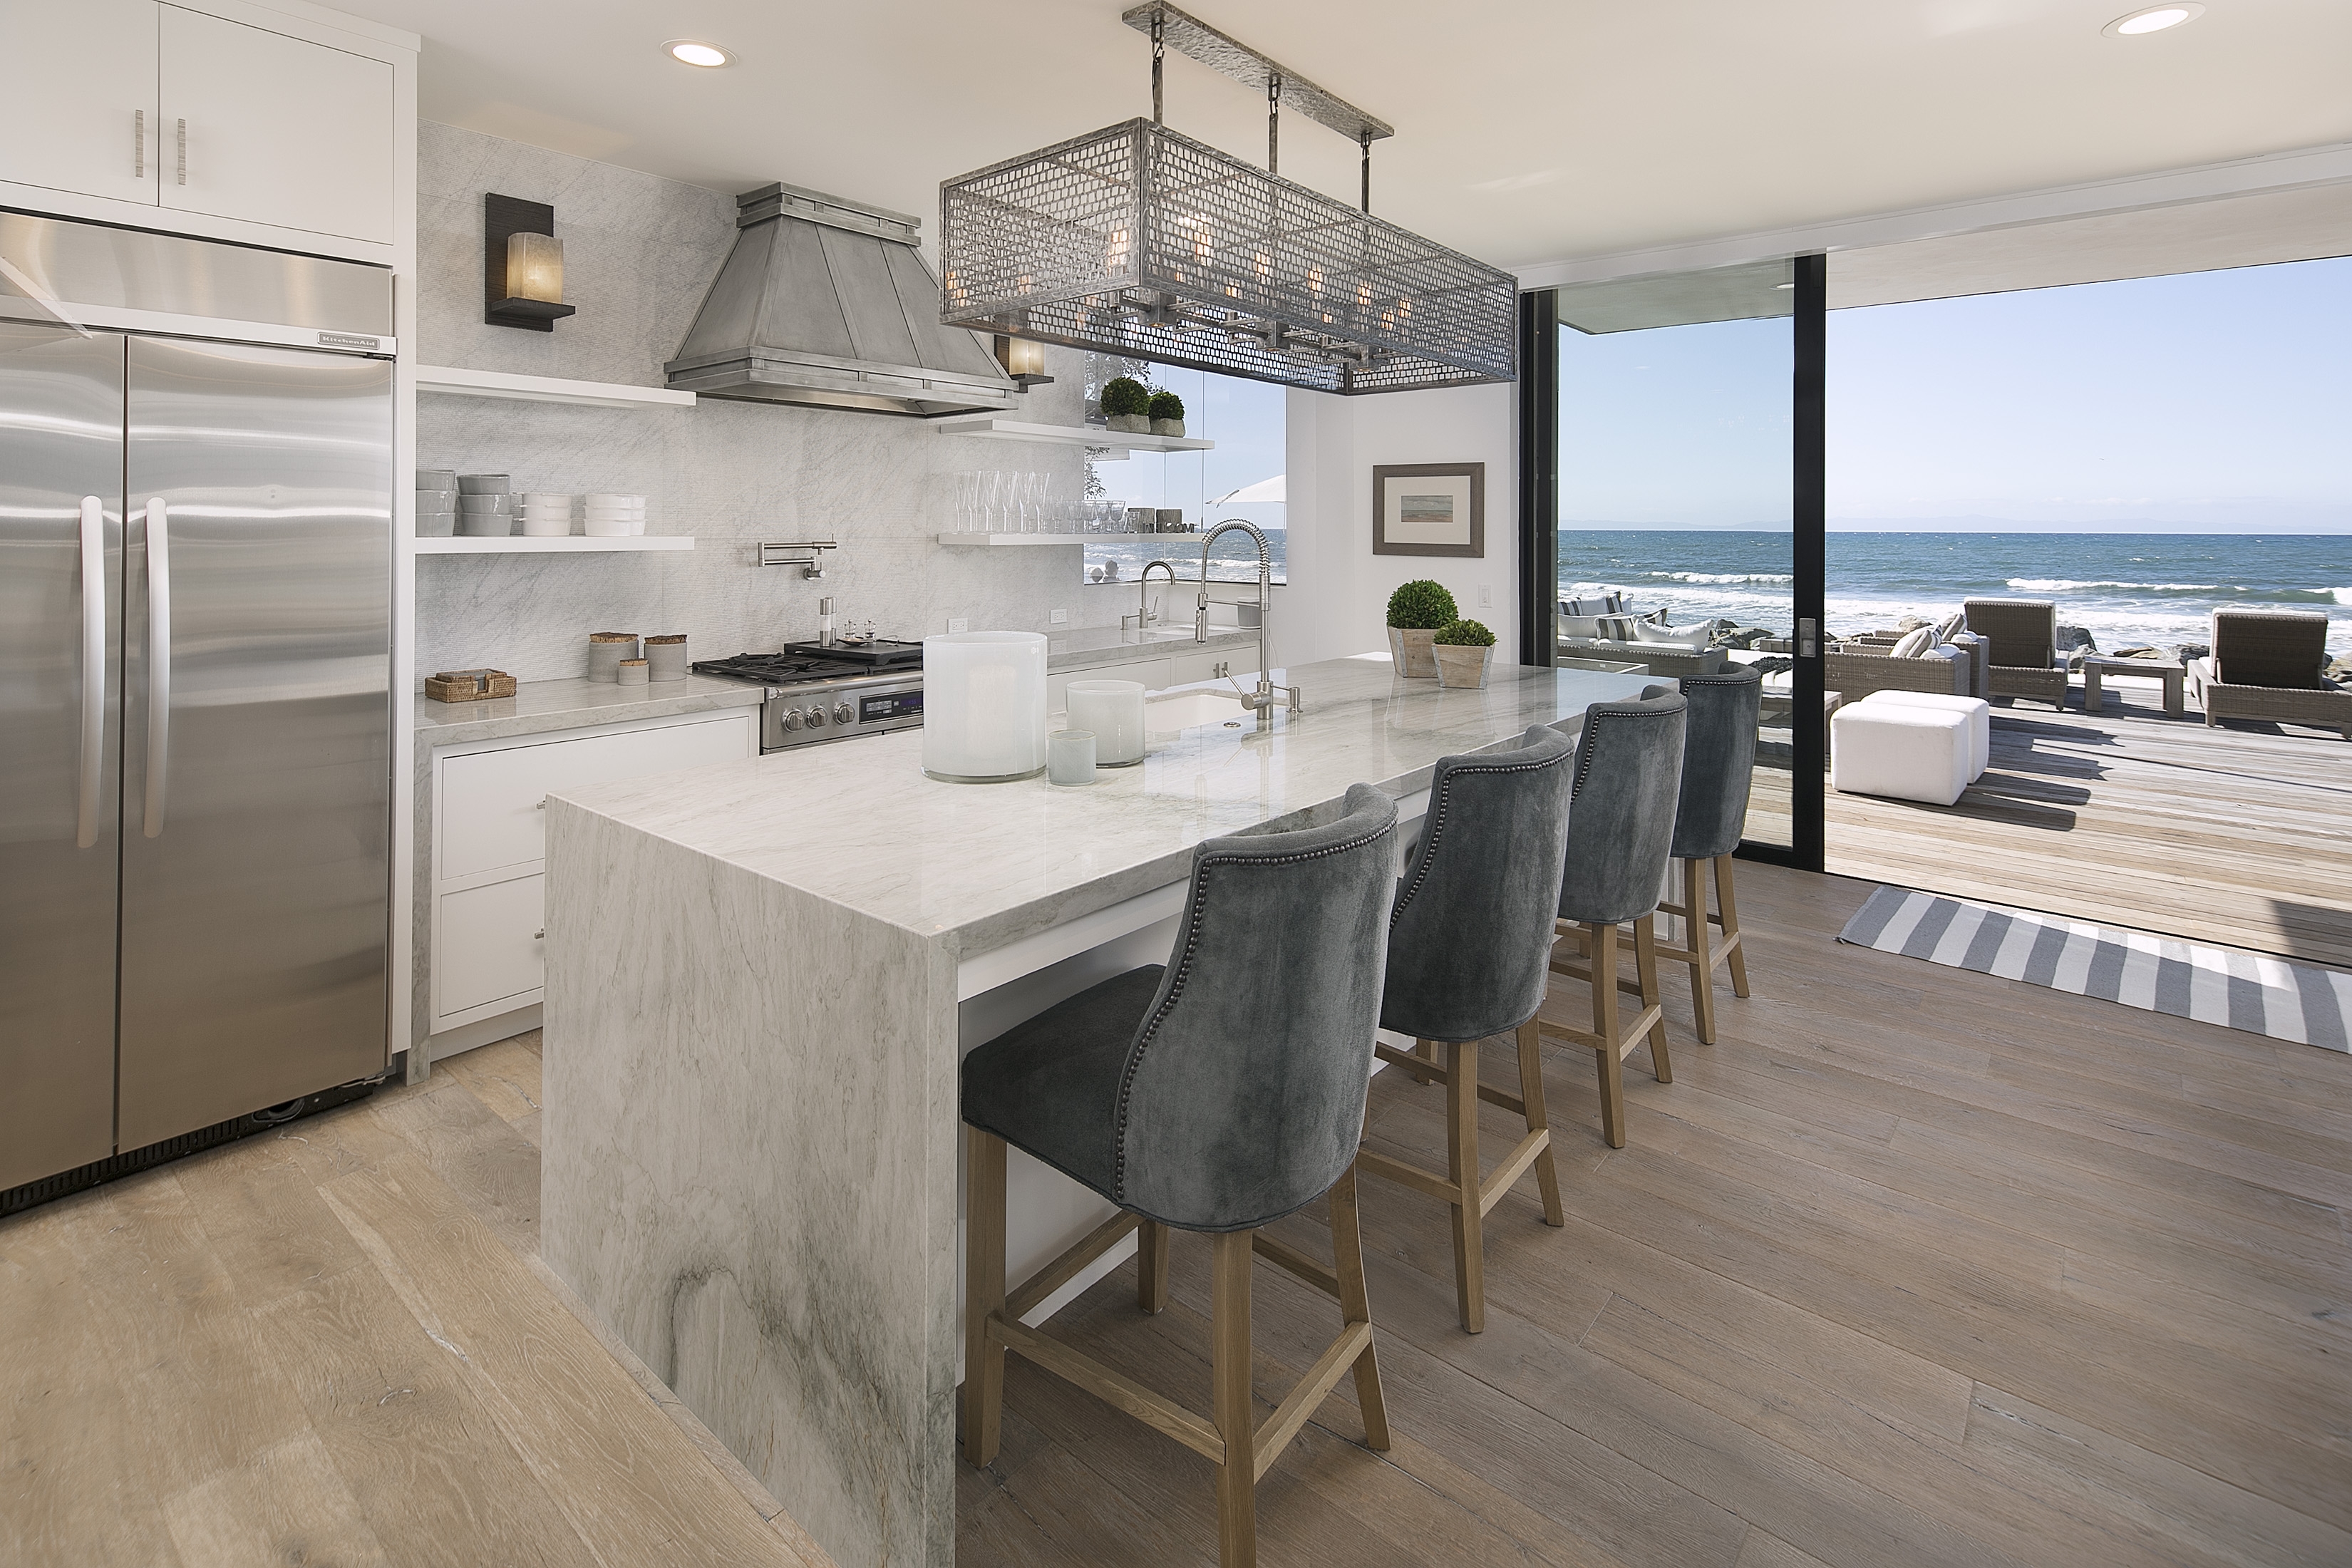 open kitchen with bar seating overlooking deck and ocean